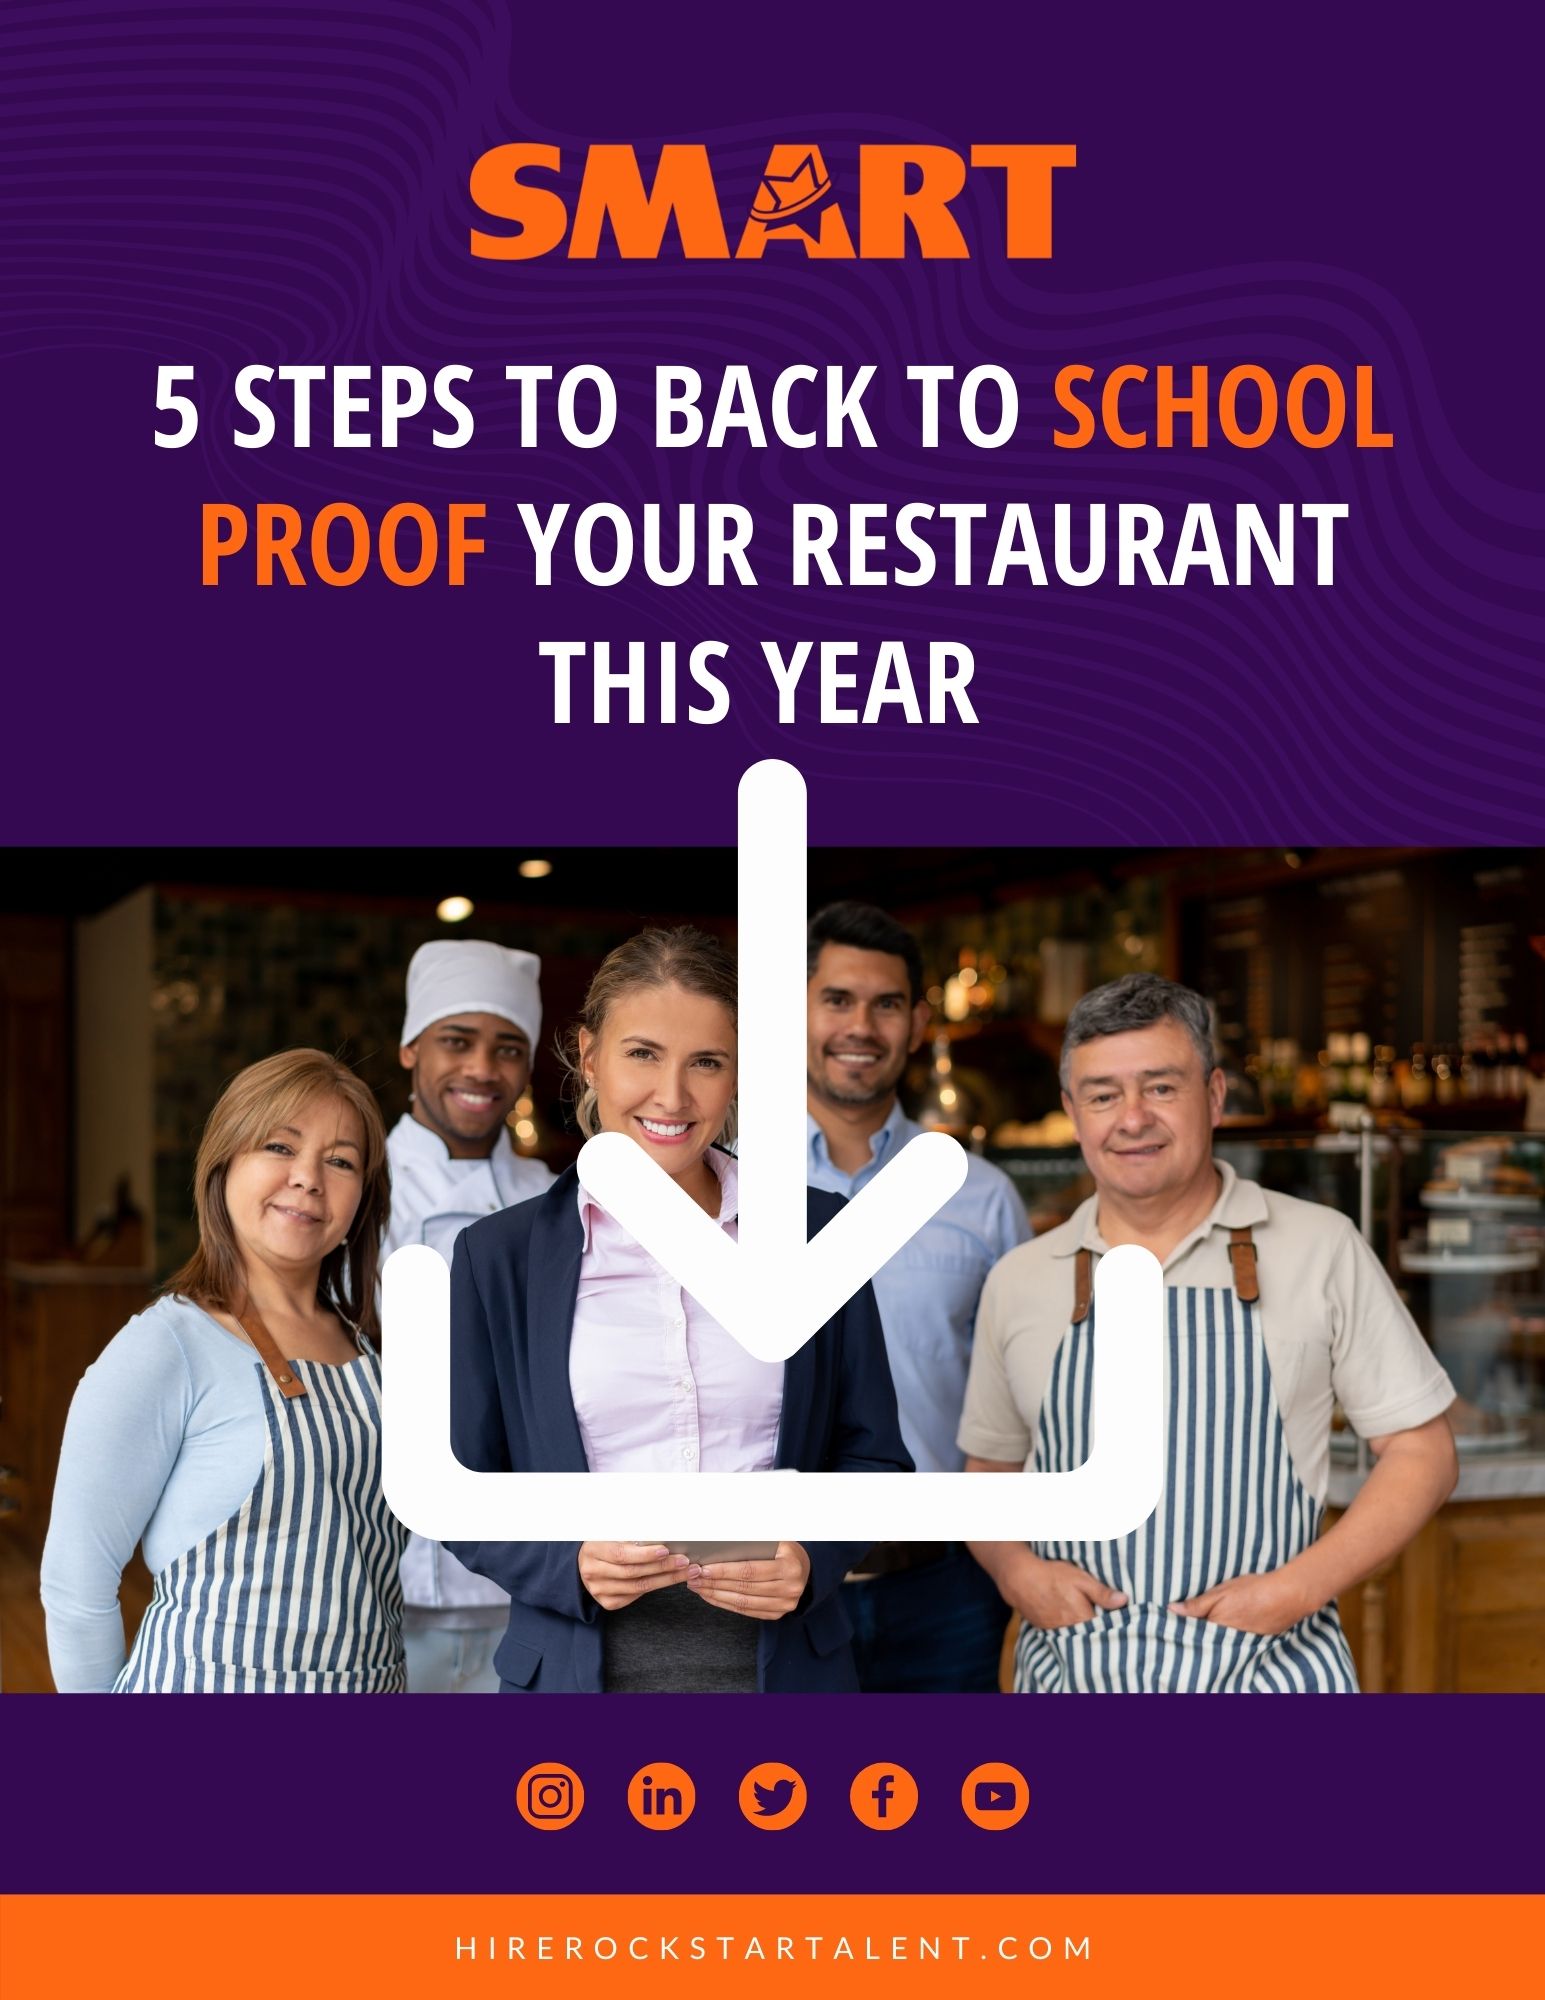 5 STEPS TO BACK TO SCHOOL PROOF YOUR RESTAURANT THIS YEAR